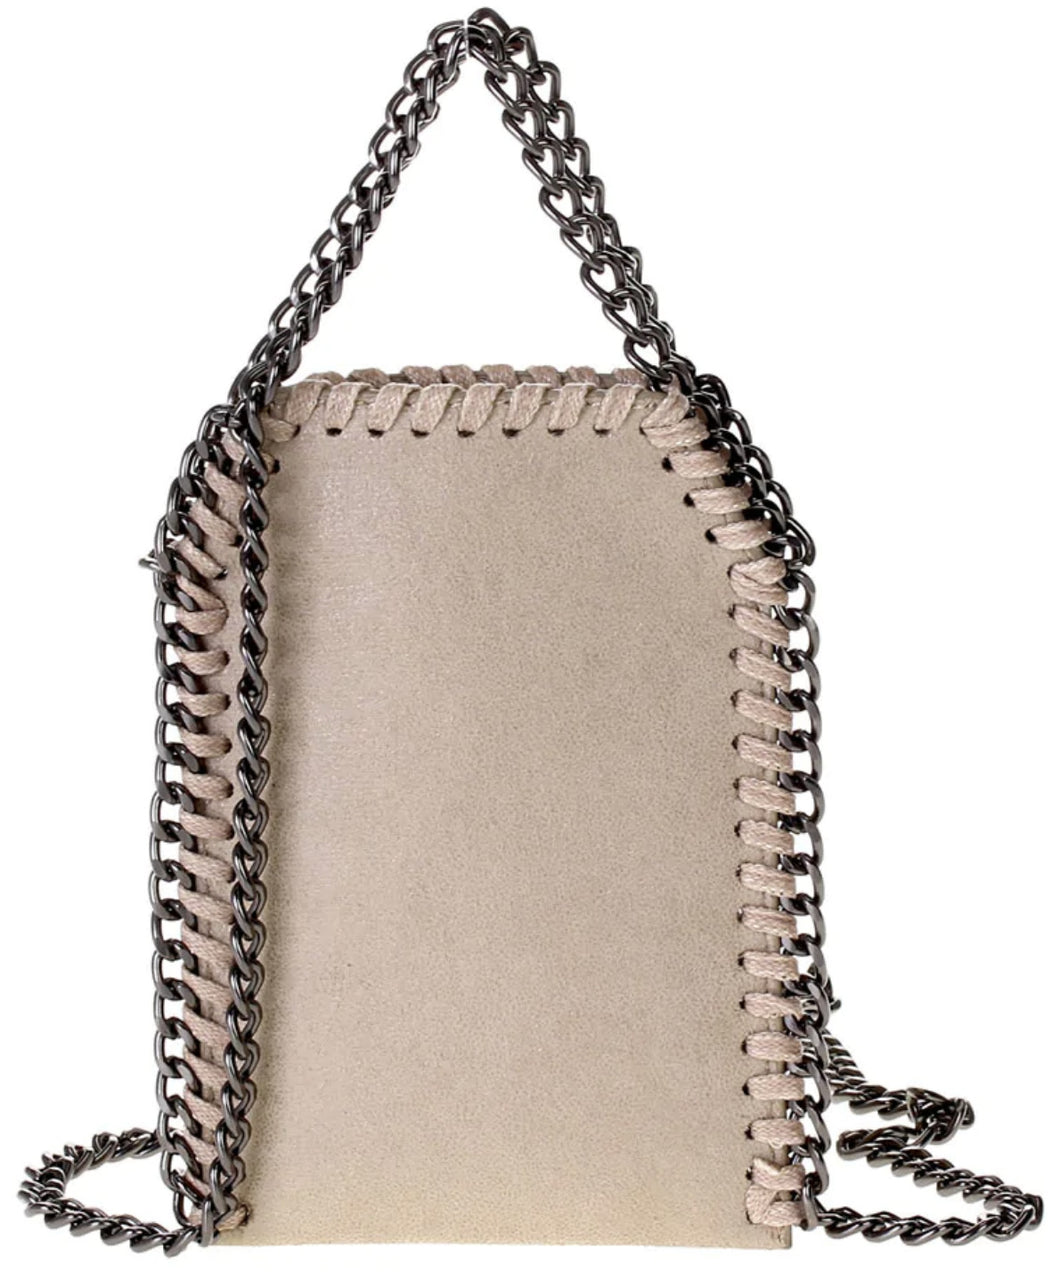 Cell Phone Purse with Chain Accent